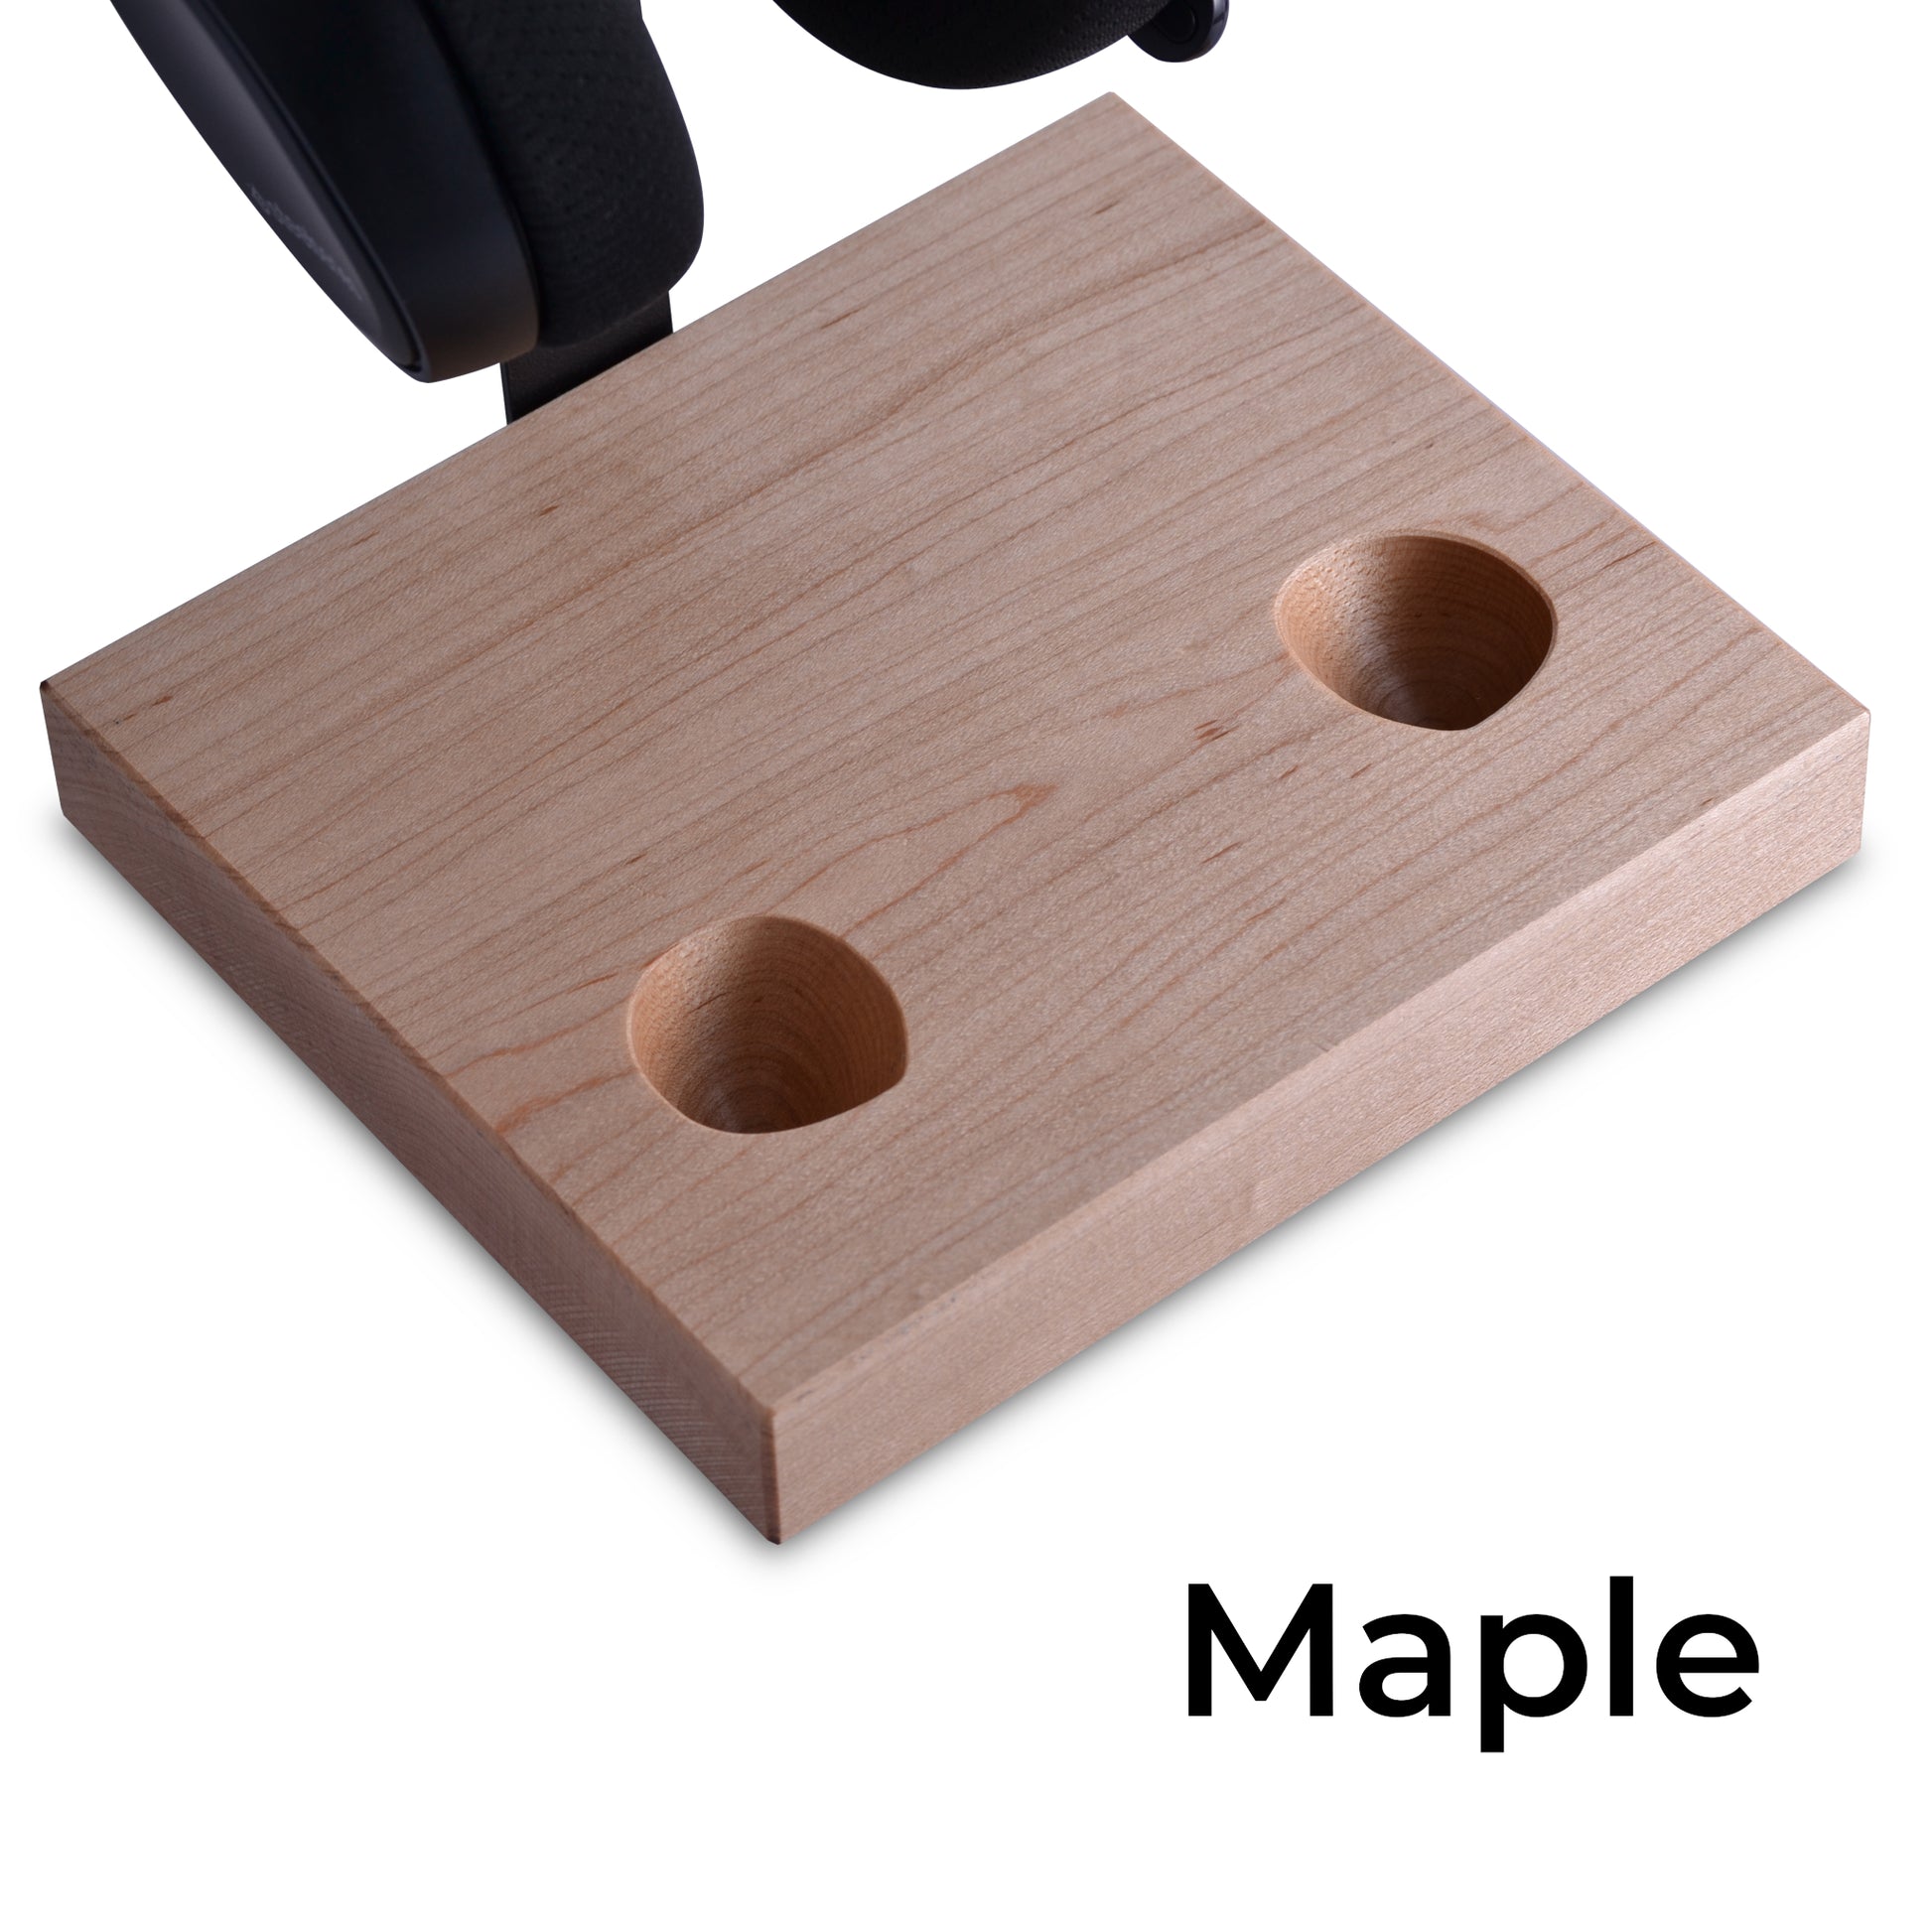 Maple version of headset and controller stand for Playstation 4 dualshock controller